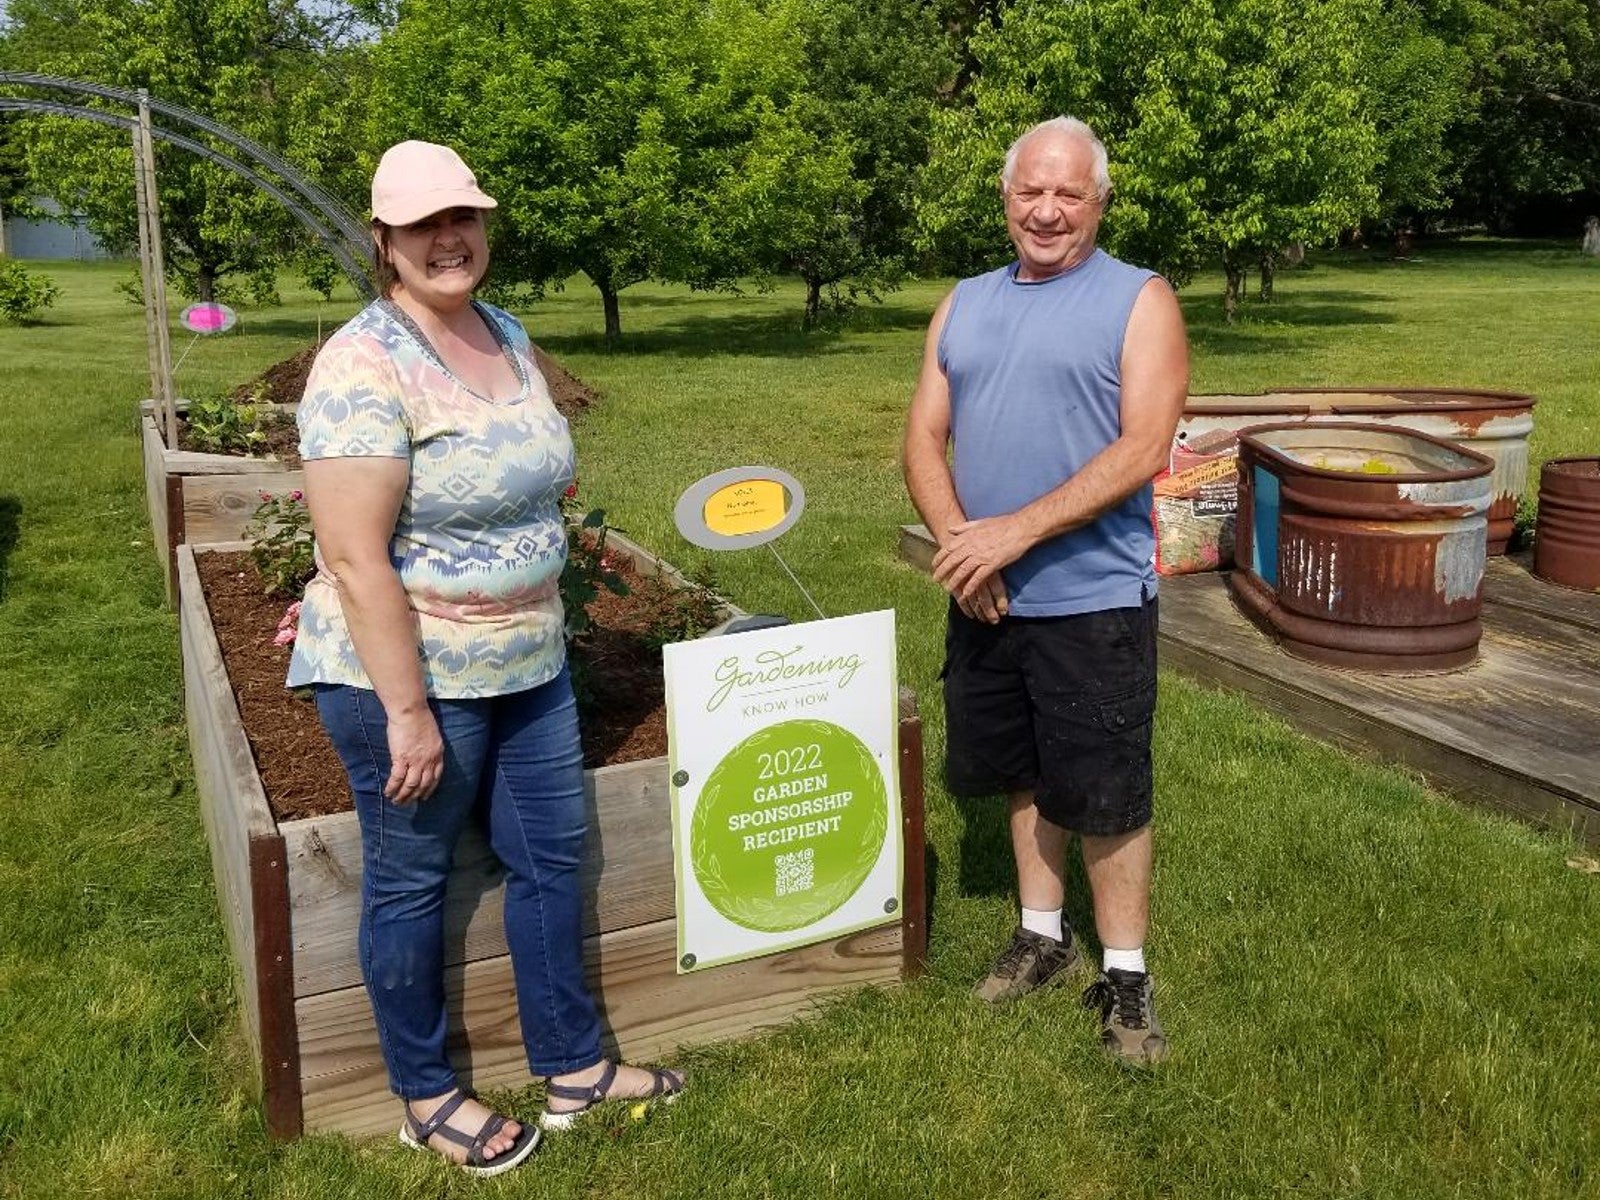 A man and woman smile next to a raised garden bed